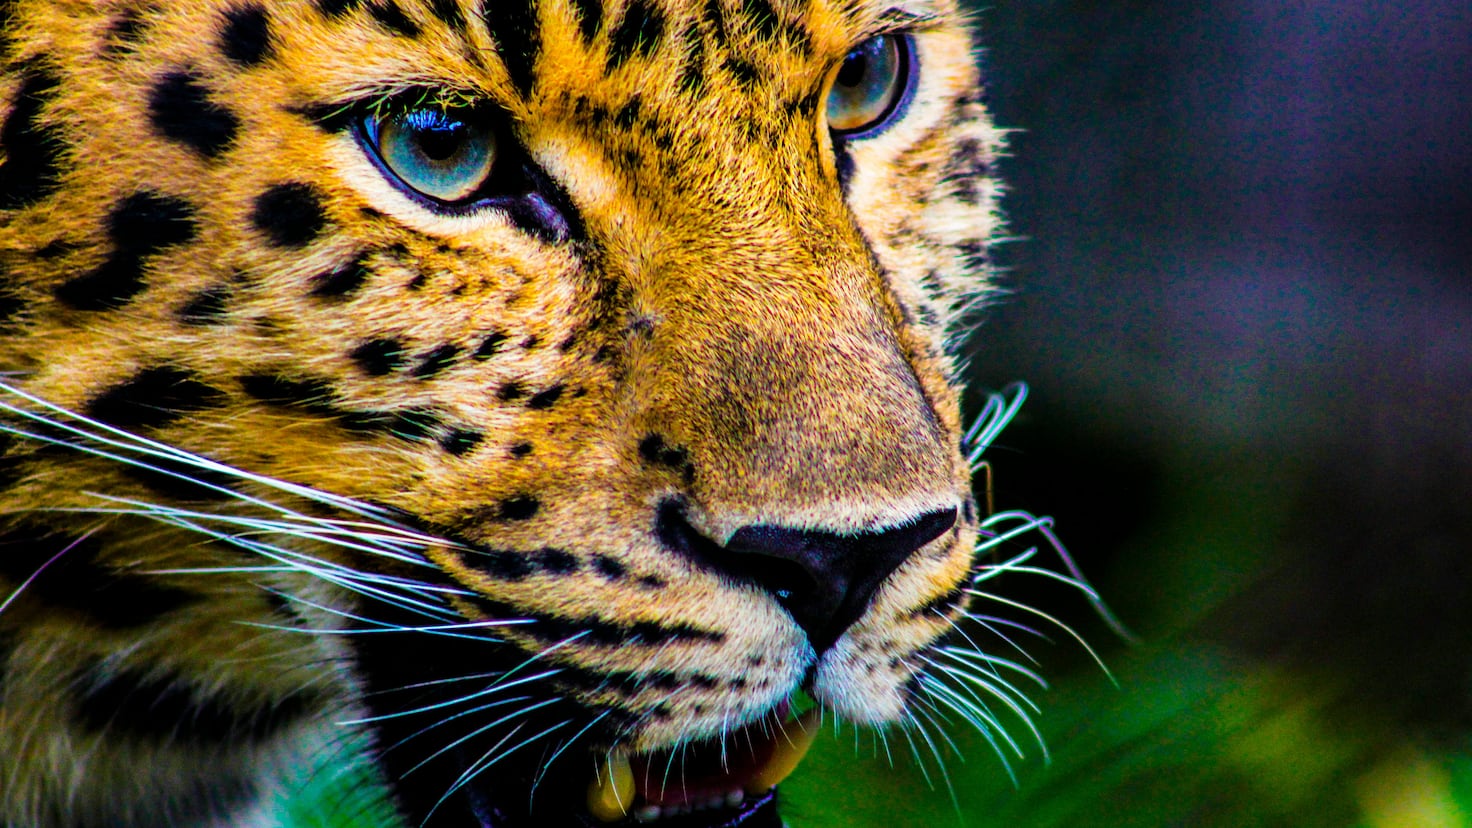 A jaguar escapes from its enclosure and kills the person in charge of caring for it in Bolivia
